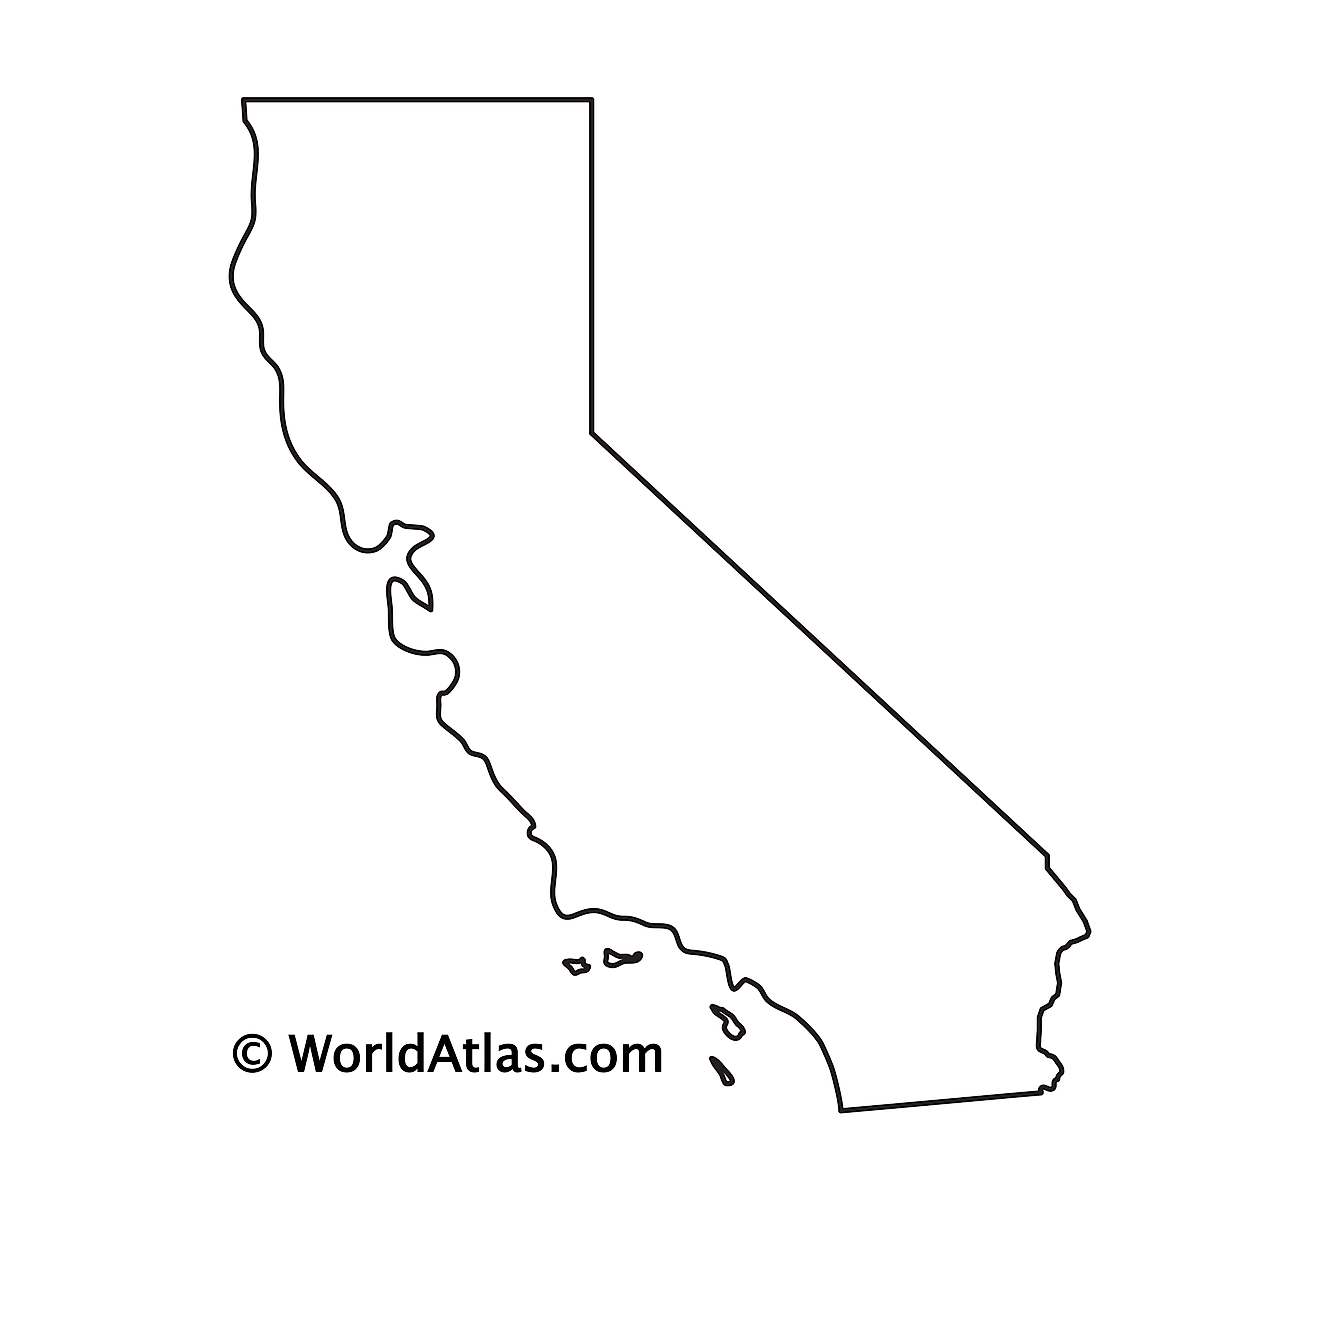 Blank Outline Map of California